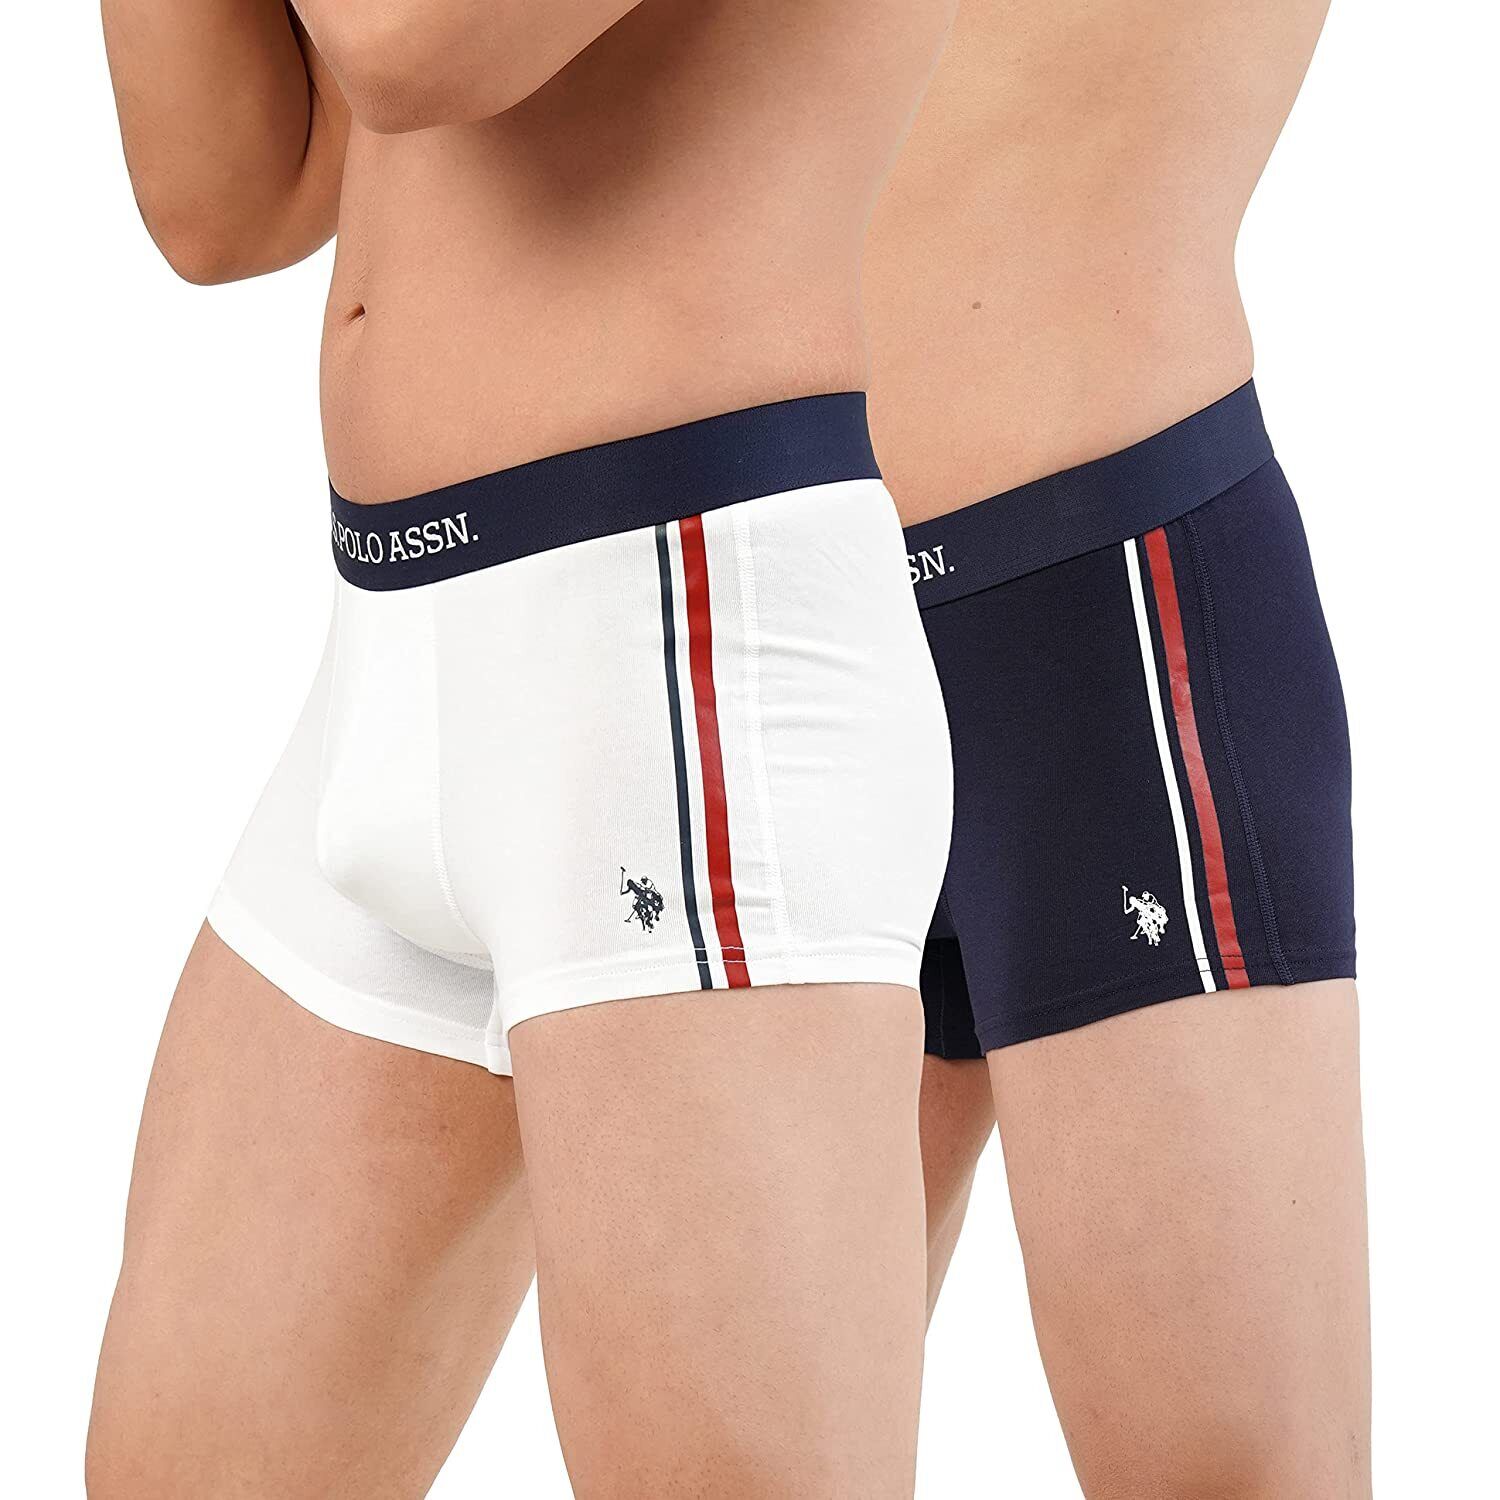 U.S. POLO ASSN. Signature Stripe Antibacterial Trunks  Pack of 2 Cool Underwear